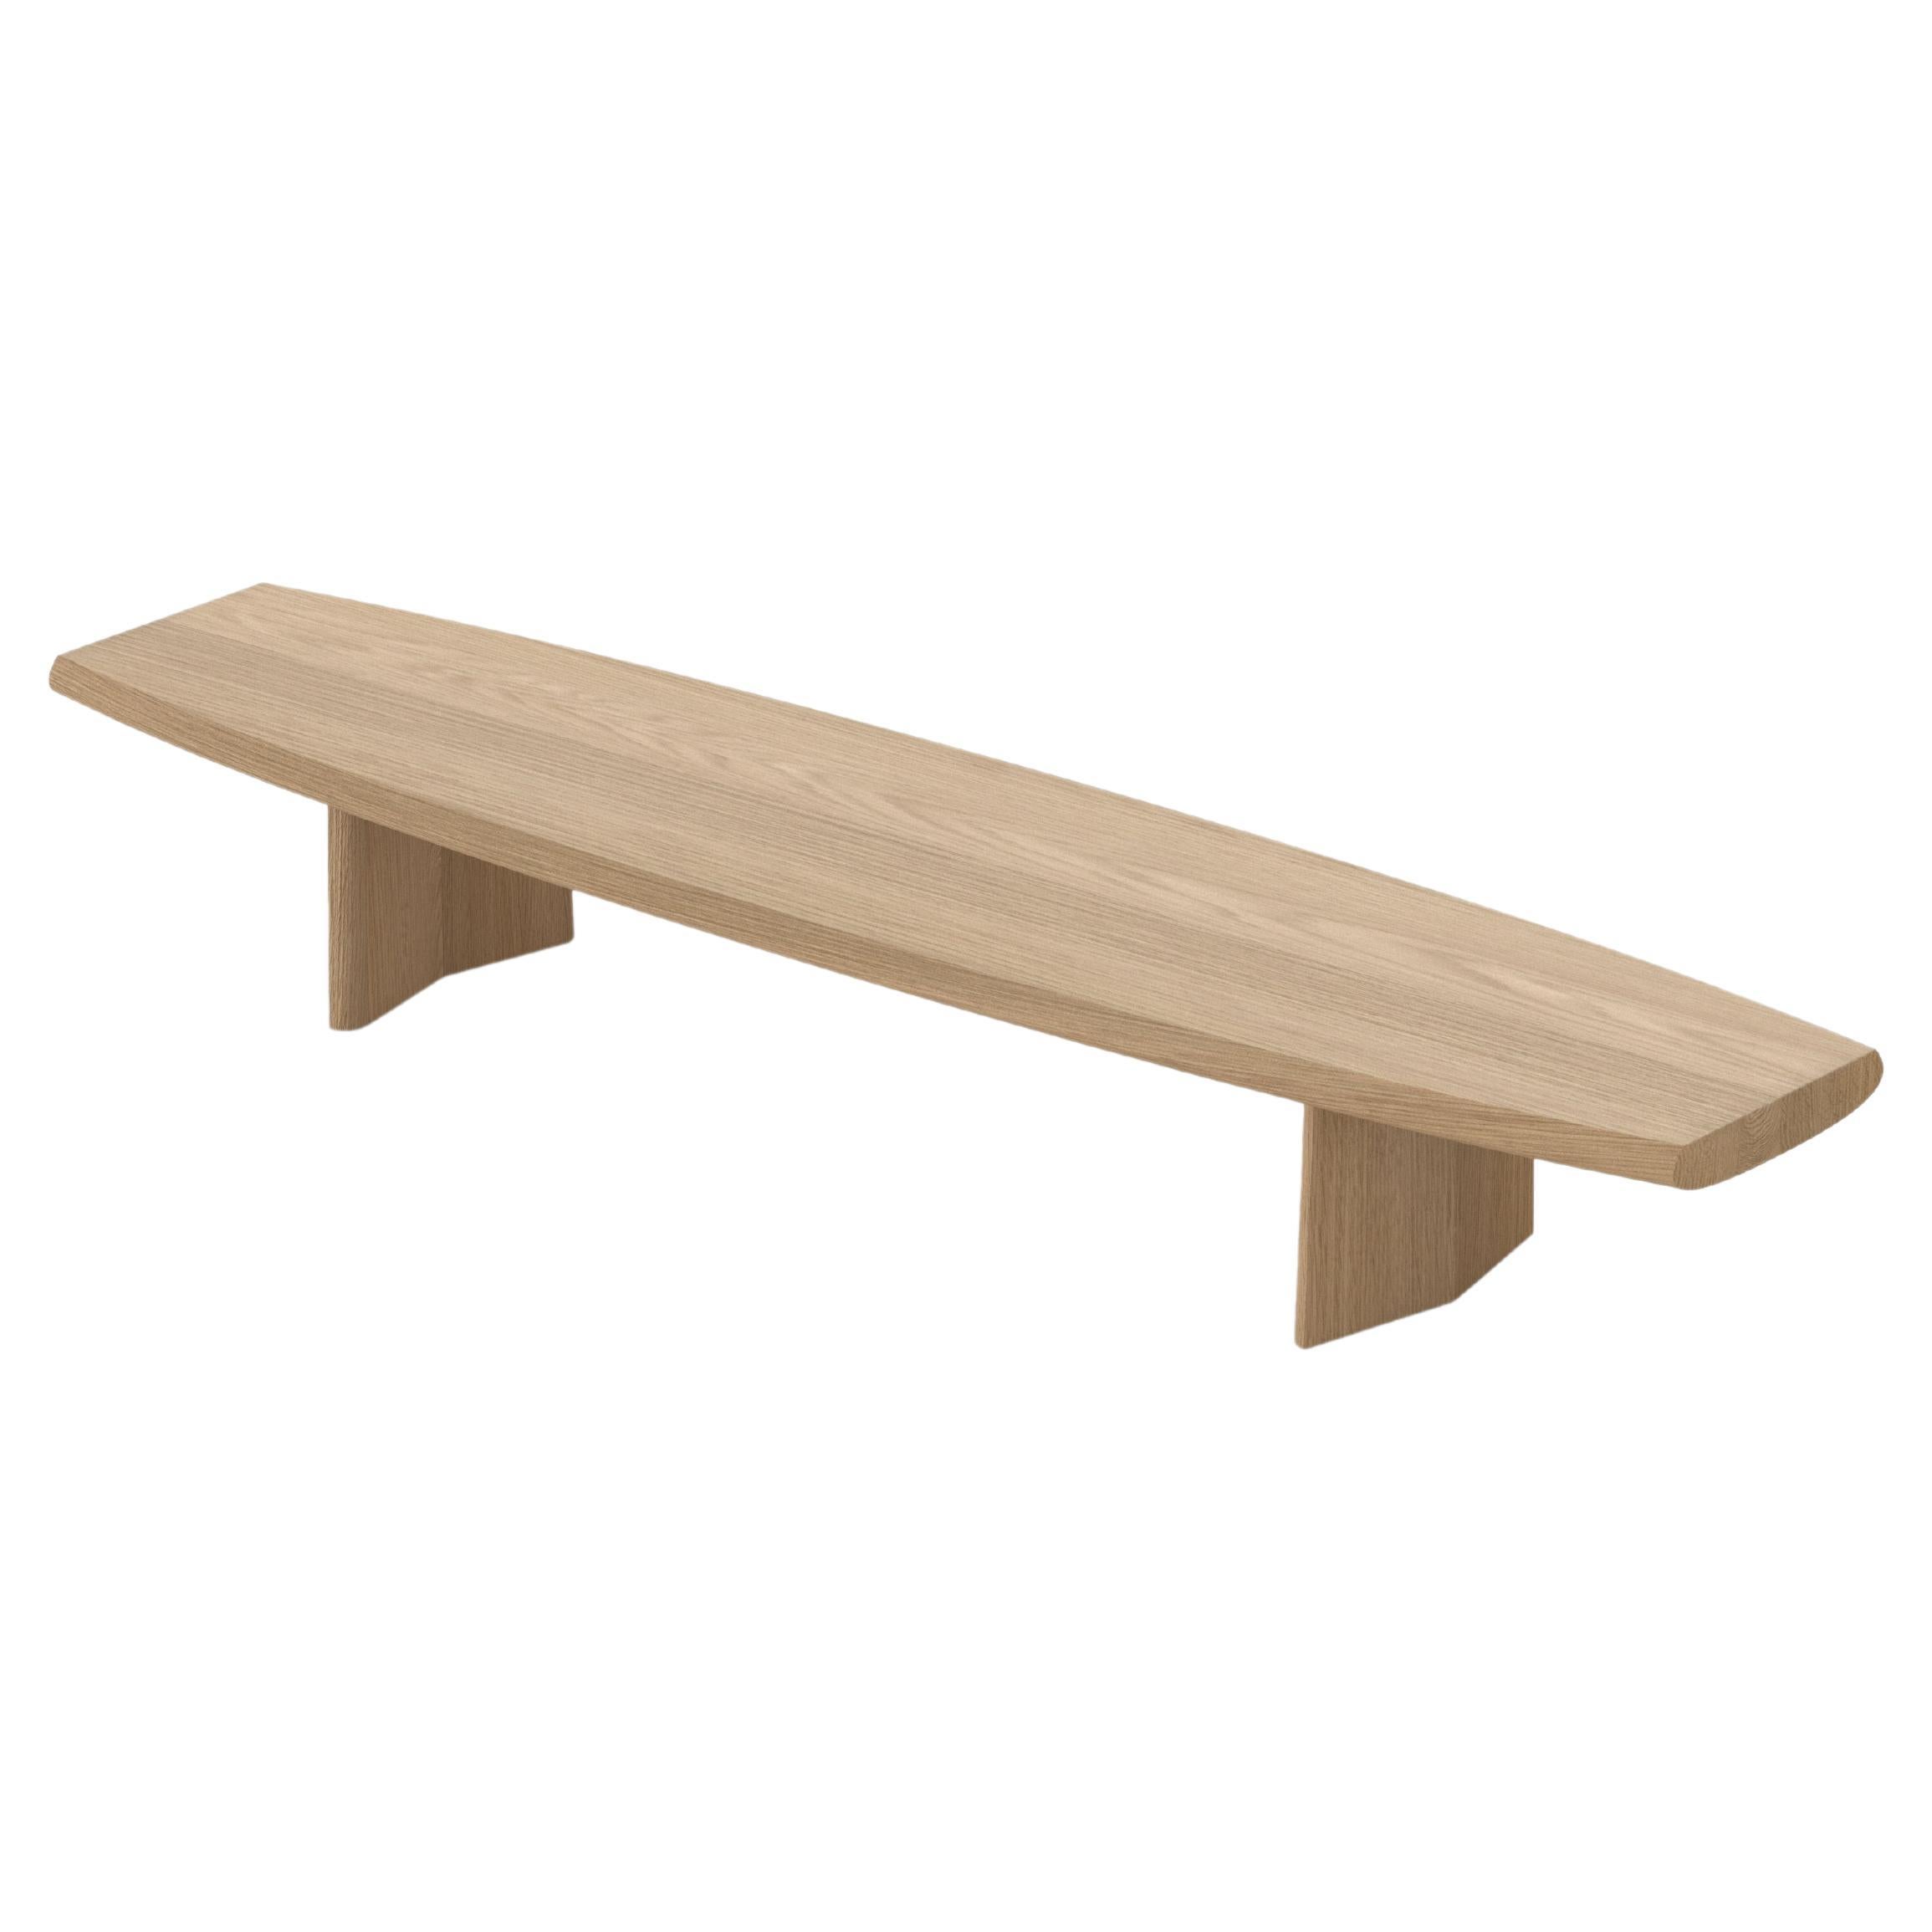 Set of Two Peana Coffee Tables, Bench in Natural Oak Wood Finish, Joel Escalona

Peana, which in English translates to base or pedestal, is a series of tables and different surfaces inspired by the idea of creating worthy furniture pieces to place